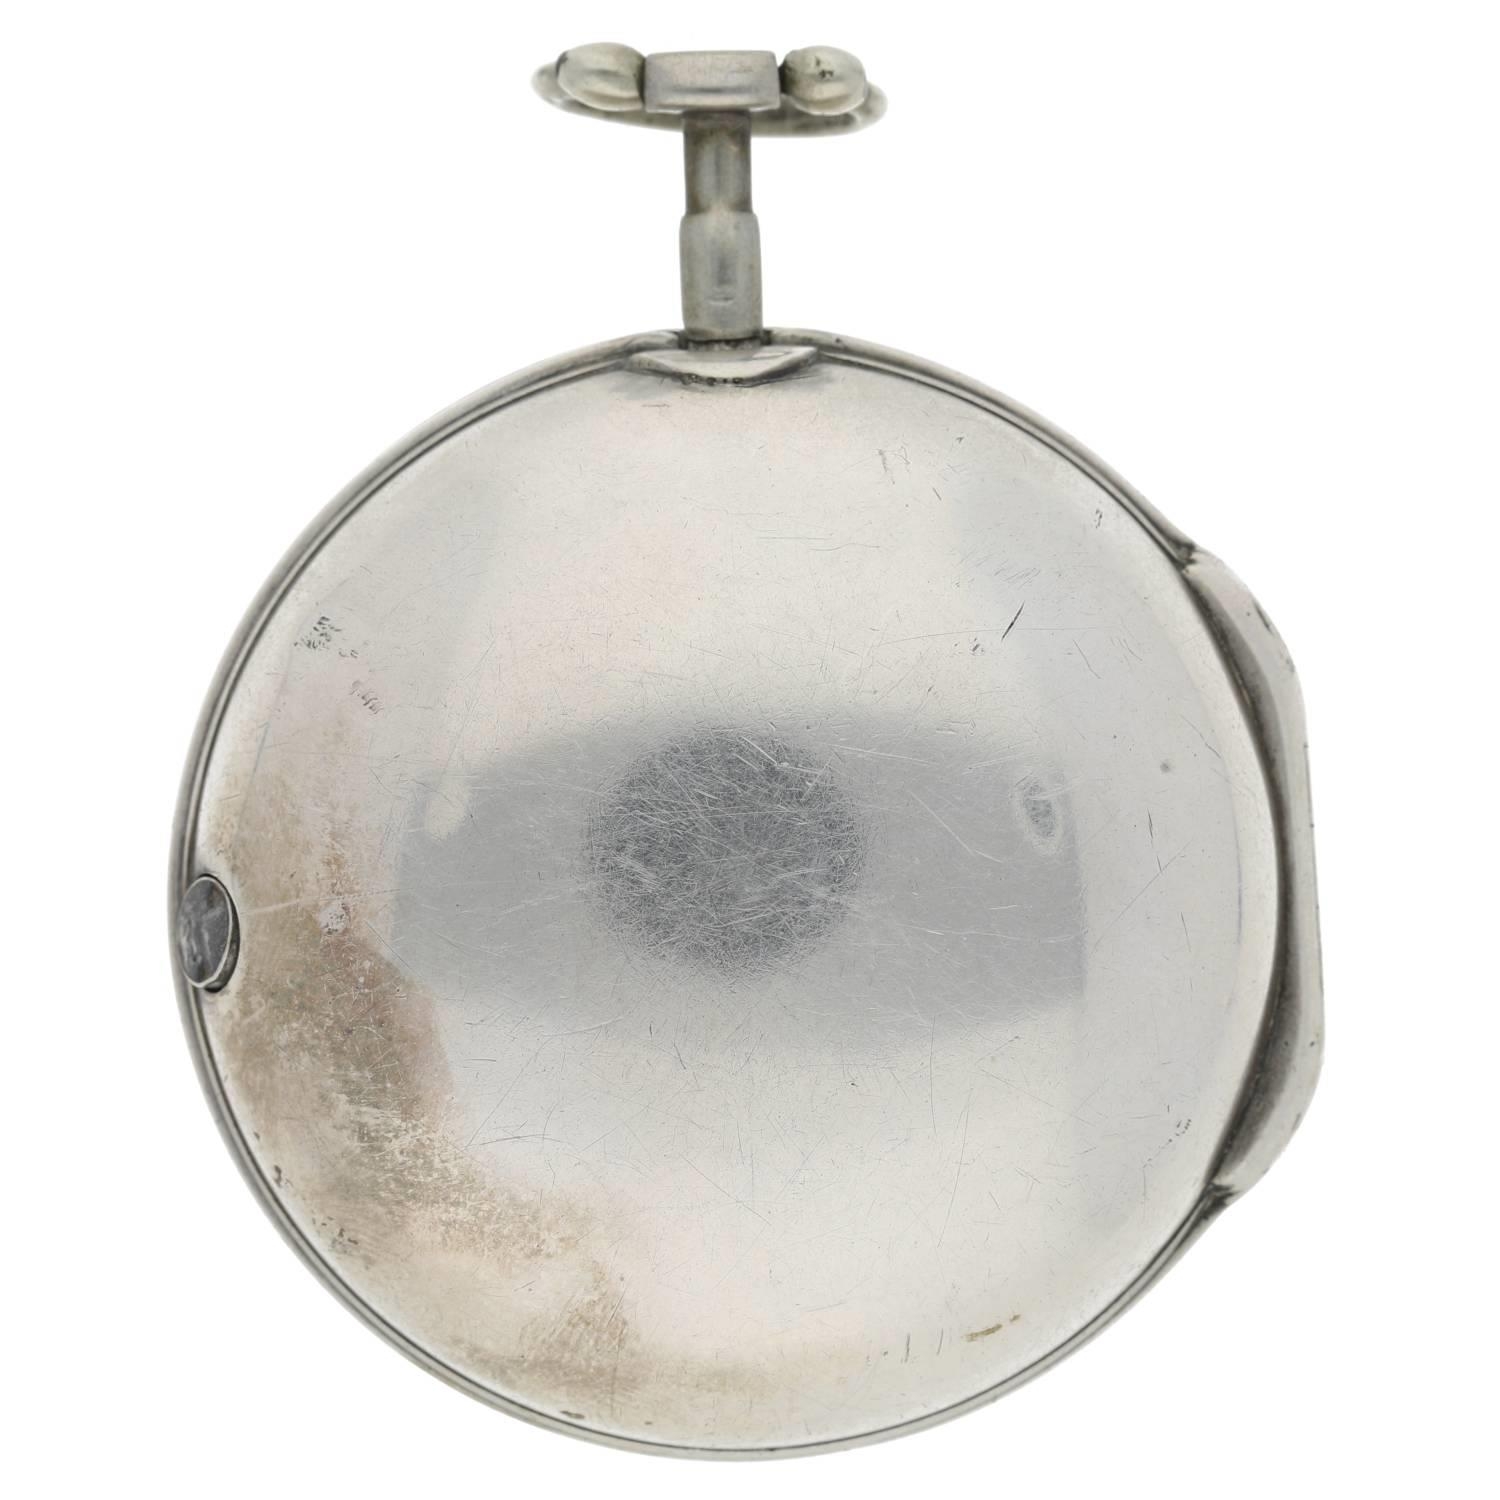 Chas. Robotham, Leicester - English 18th century silver pair cased verge pocket watch, London - Image 8 of 10